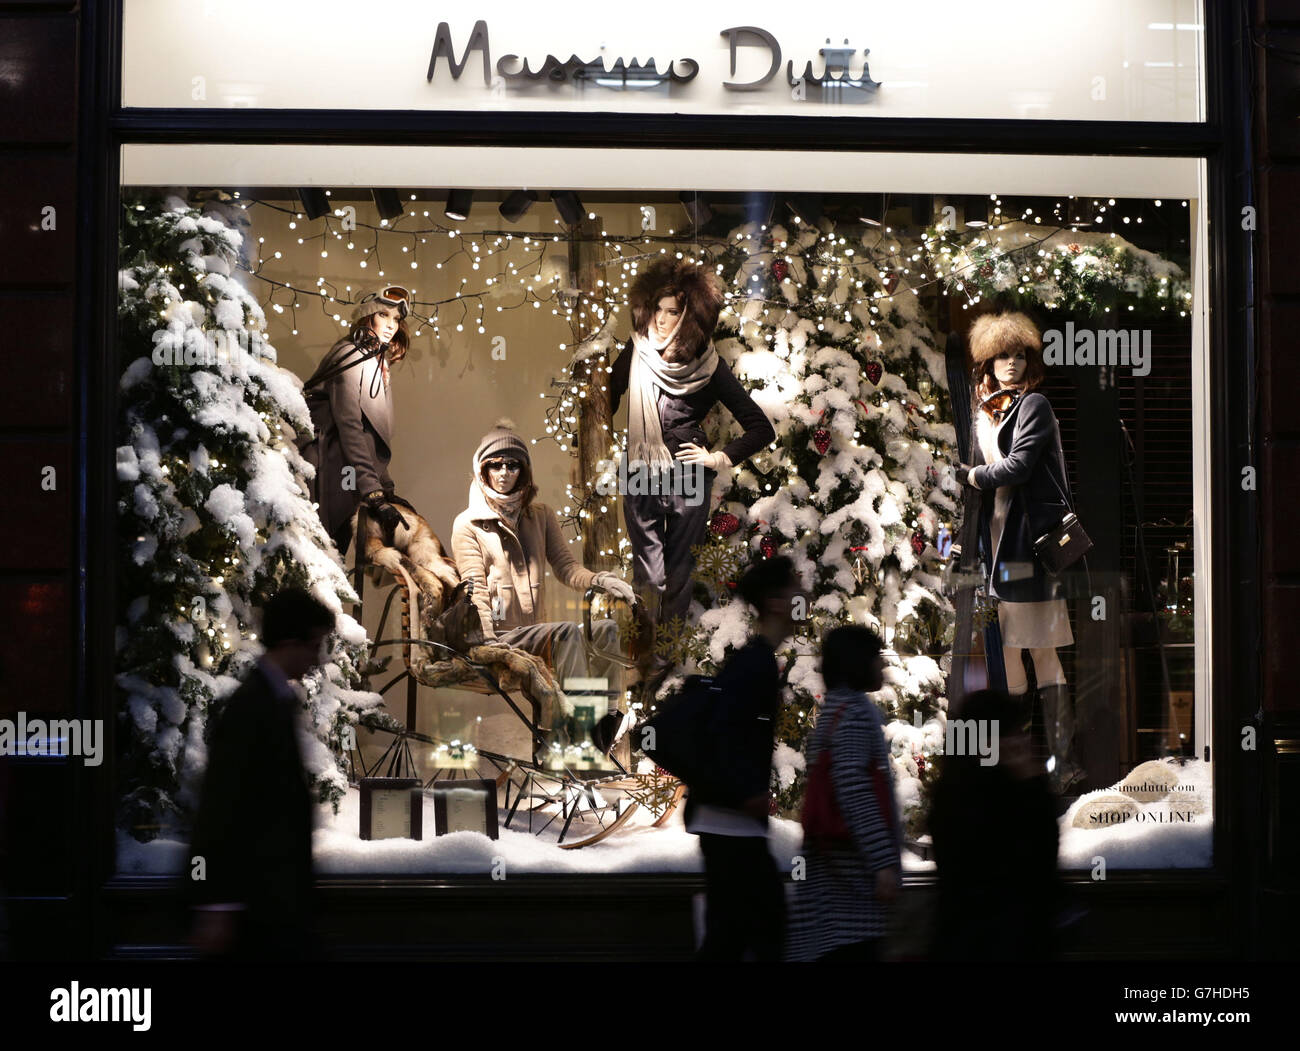 Massimo dutti hi-res stock photography and images - Page 3 - Alamy